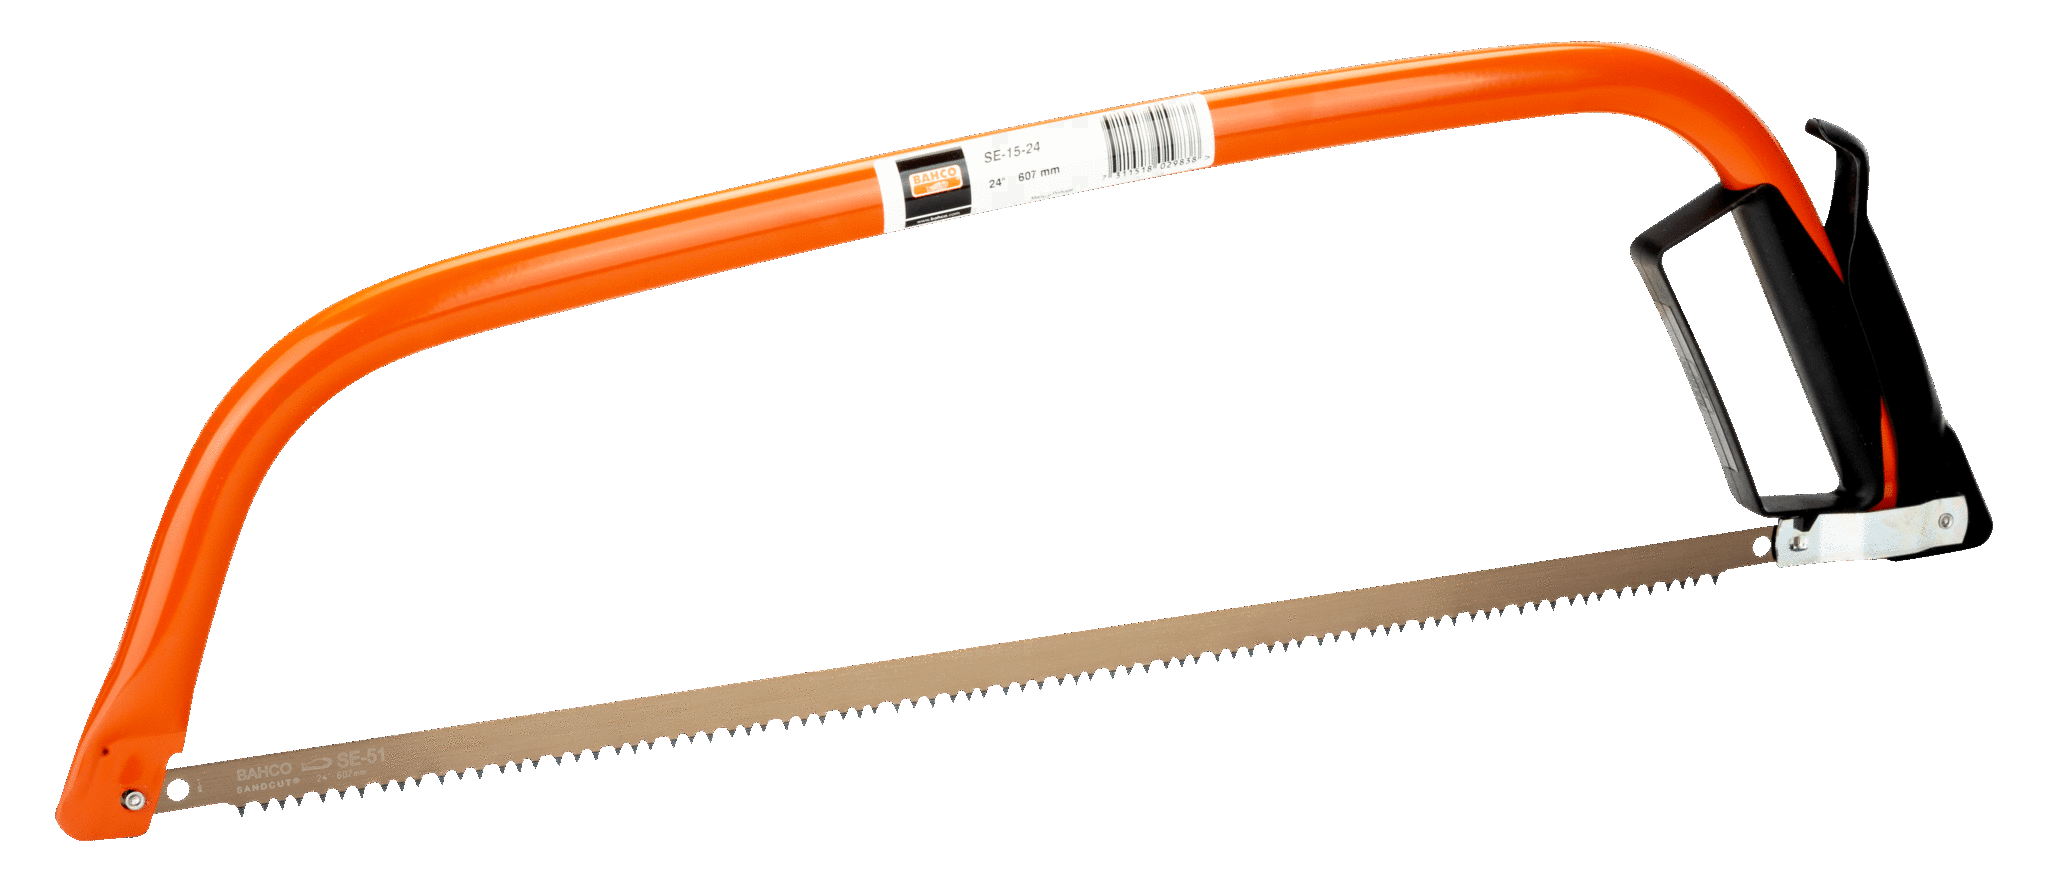 General Purpose Bow Saws 21" - SE-16-21 by Bahco